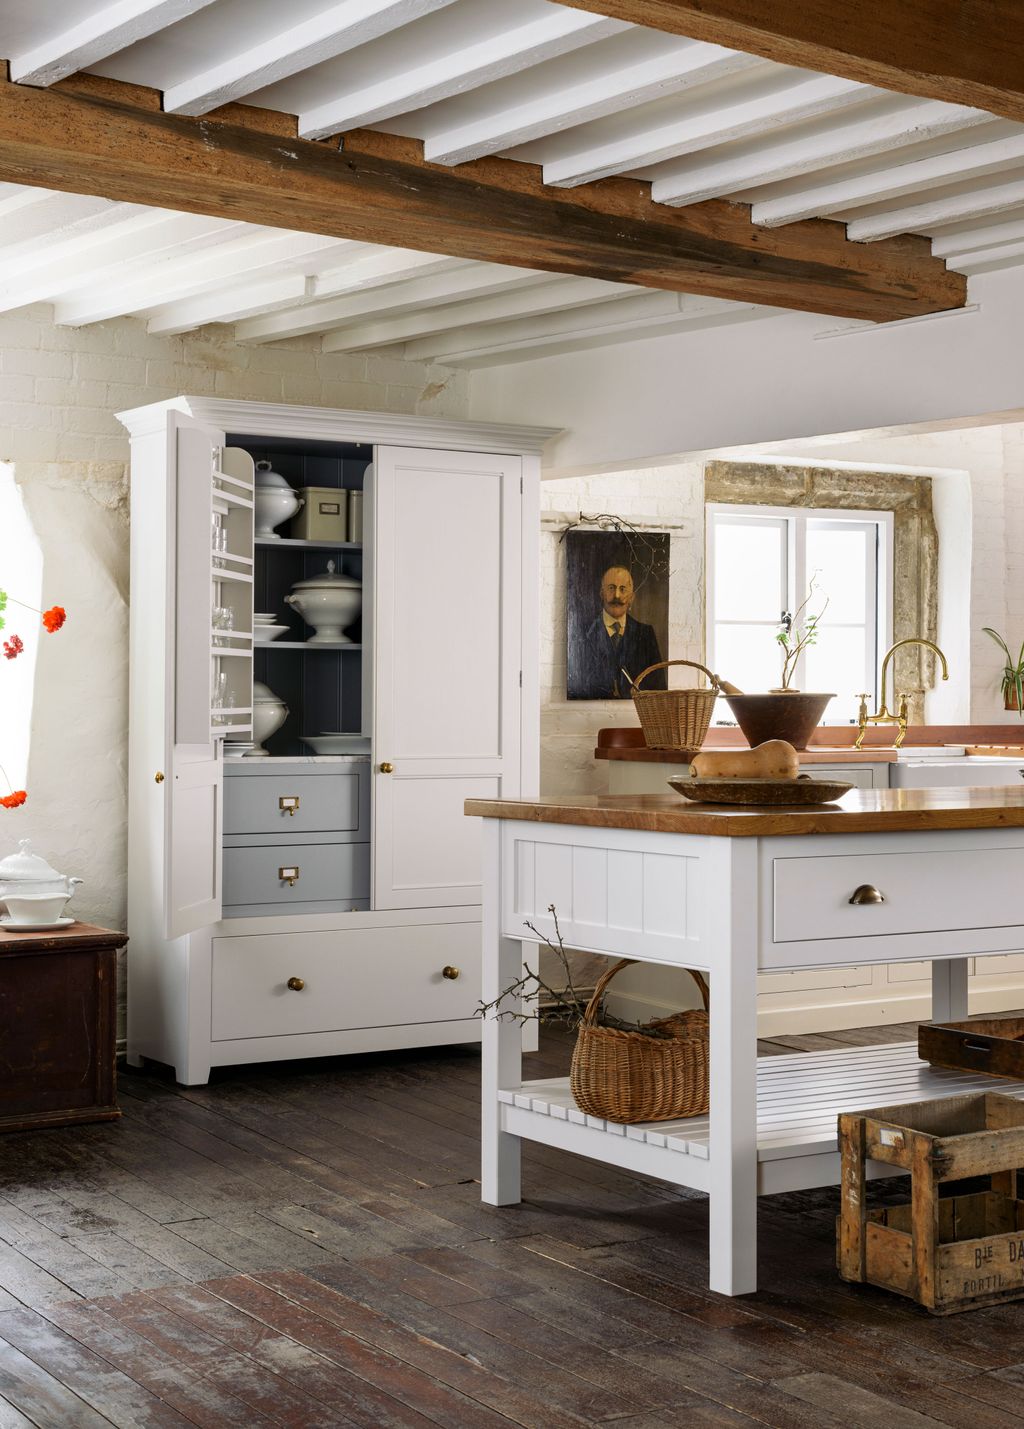 How to make a small kitchen look bigger: 15 expert tips | Homes & Gardens